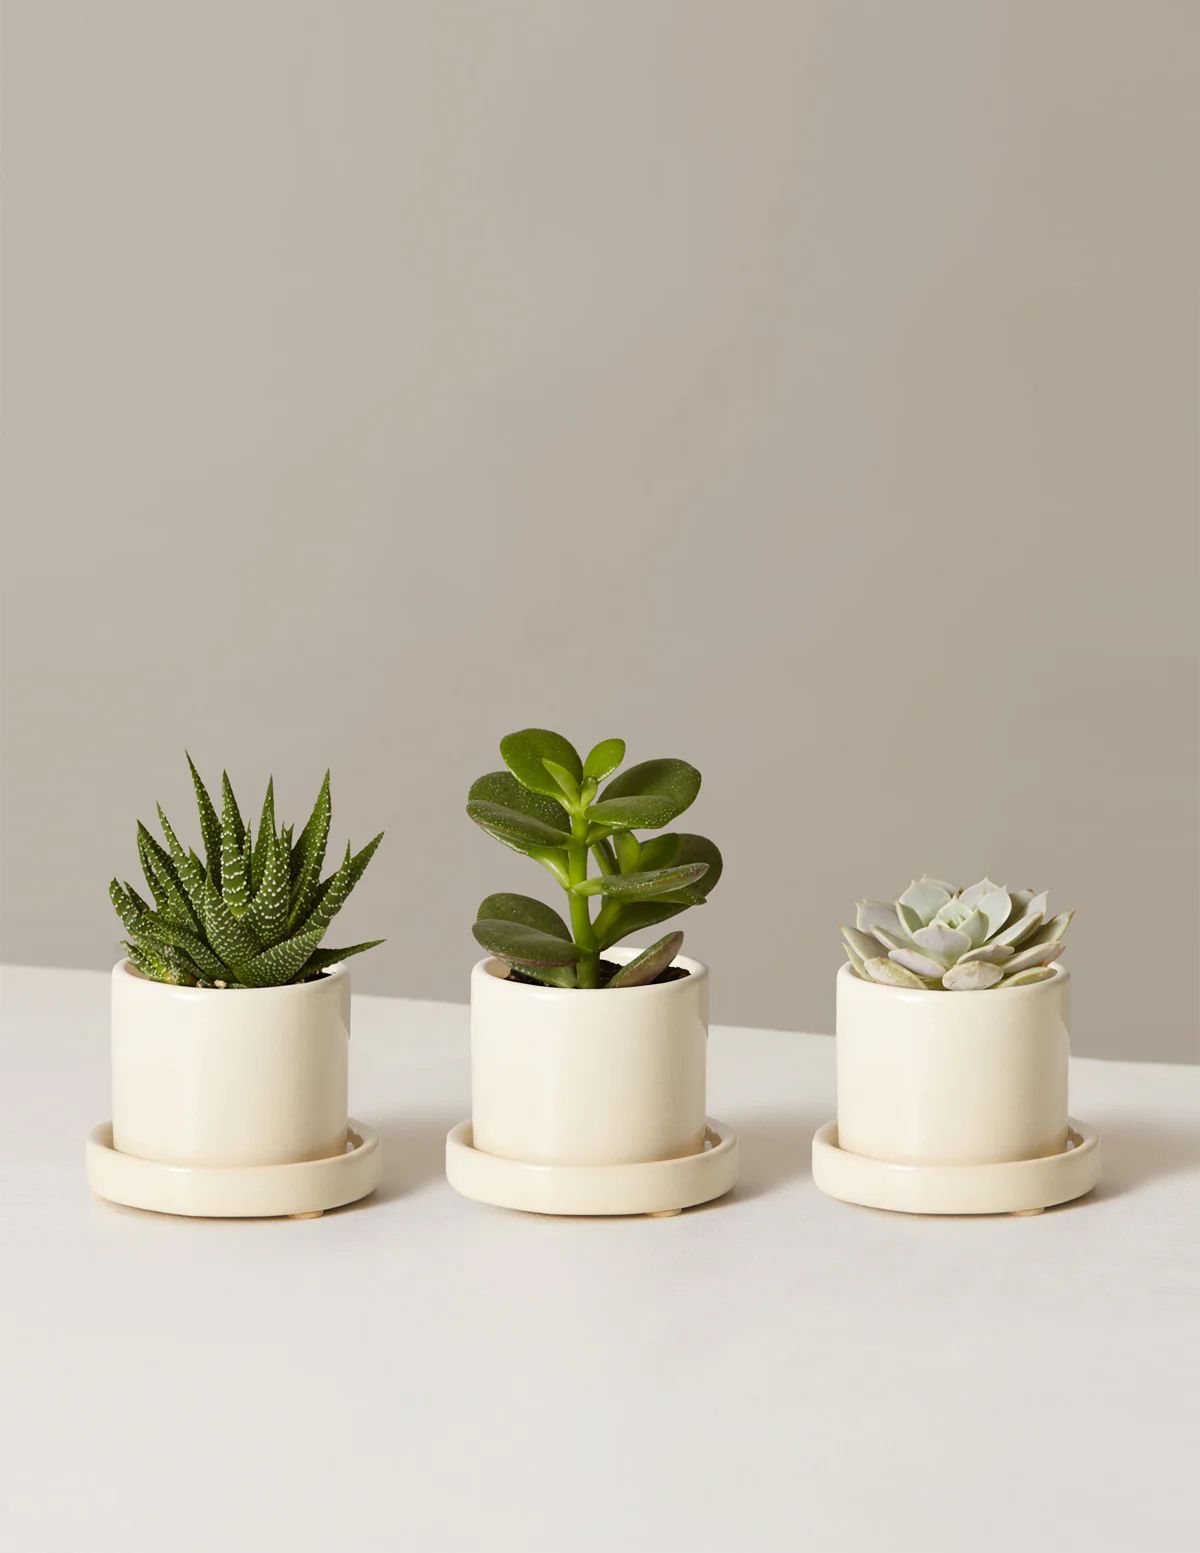 Succulent Assortment with Planters
    $98 | The Sill